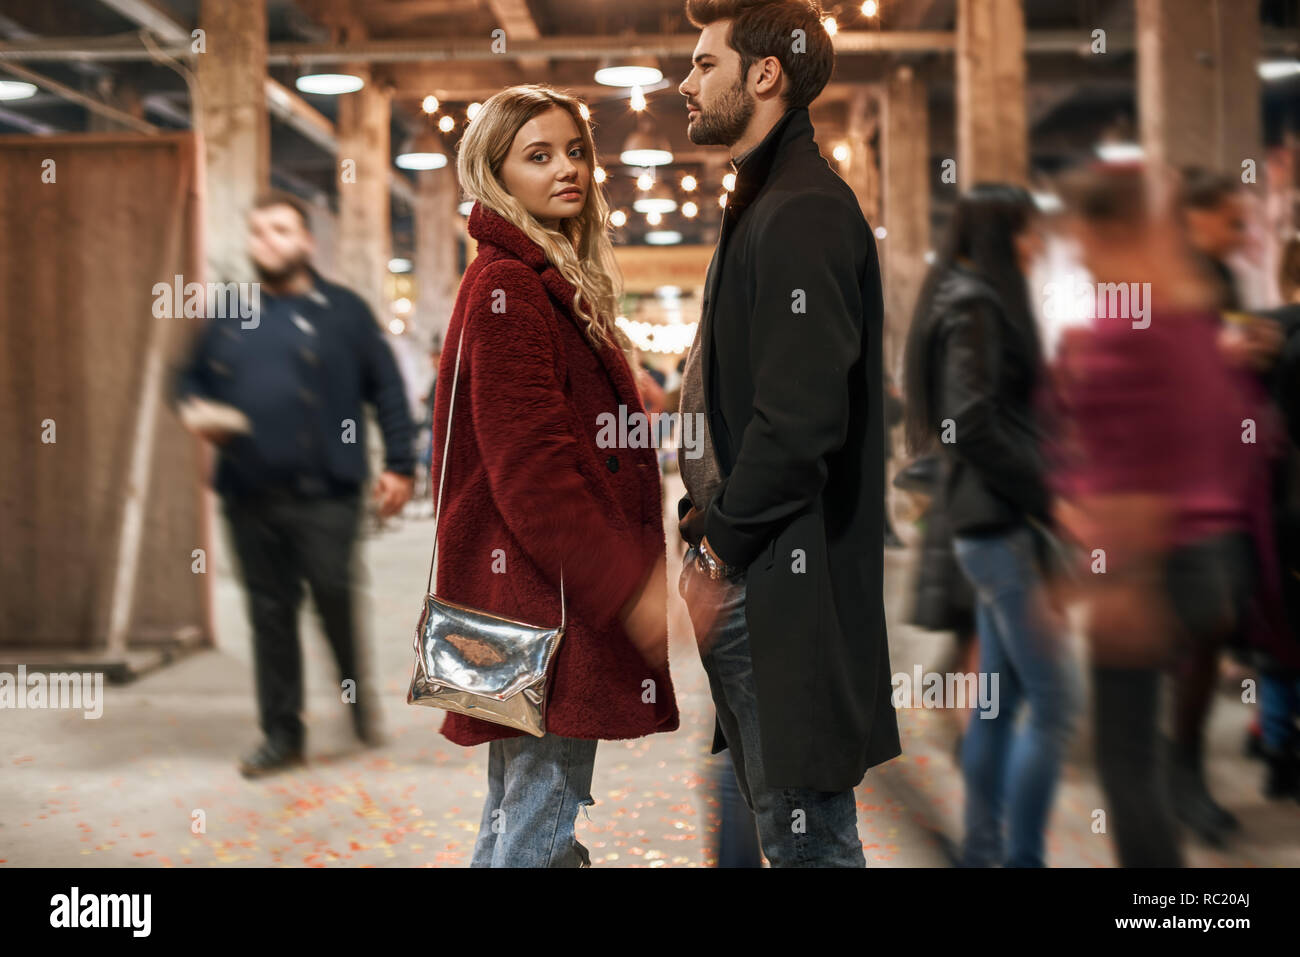 Stroll through the market together. Happy young joyful couple standing in rows at small street market. Autumn season, blond haired woman looking to th Stock Photo